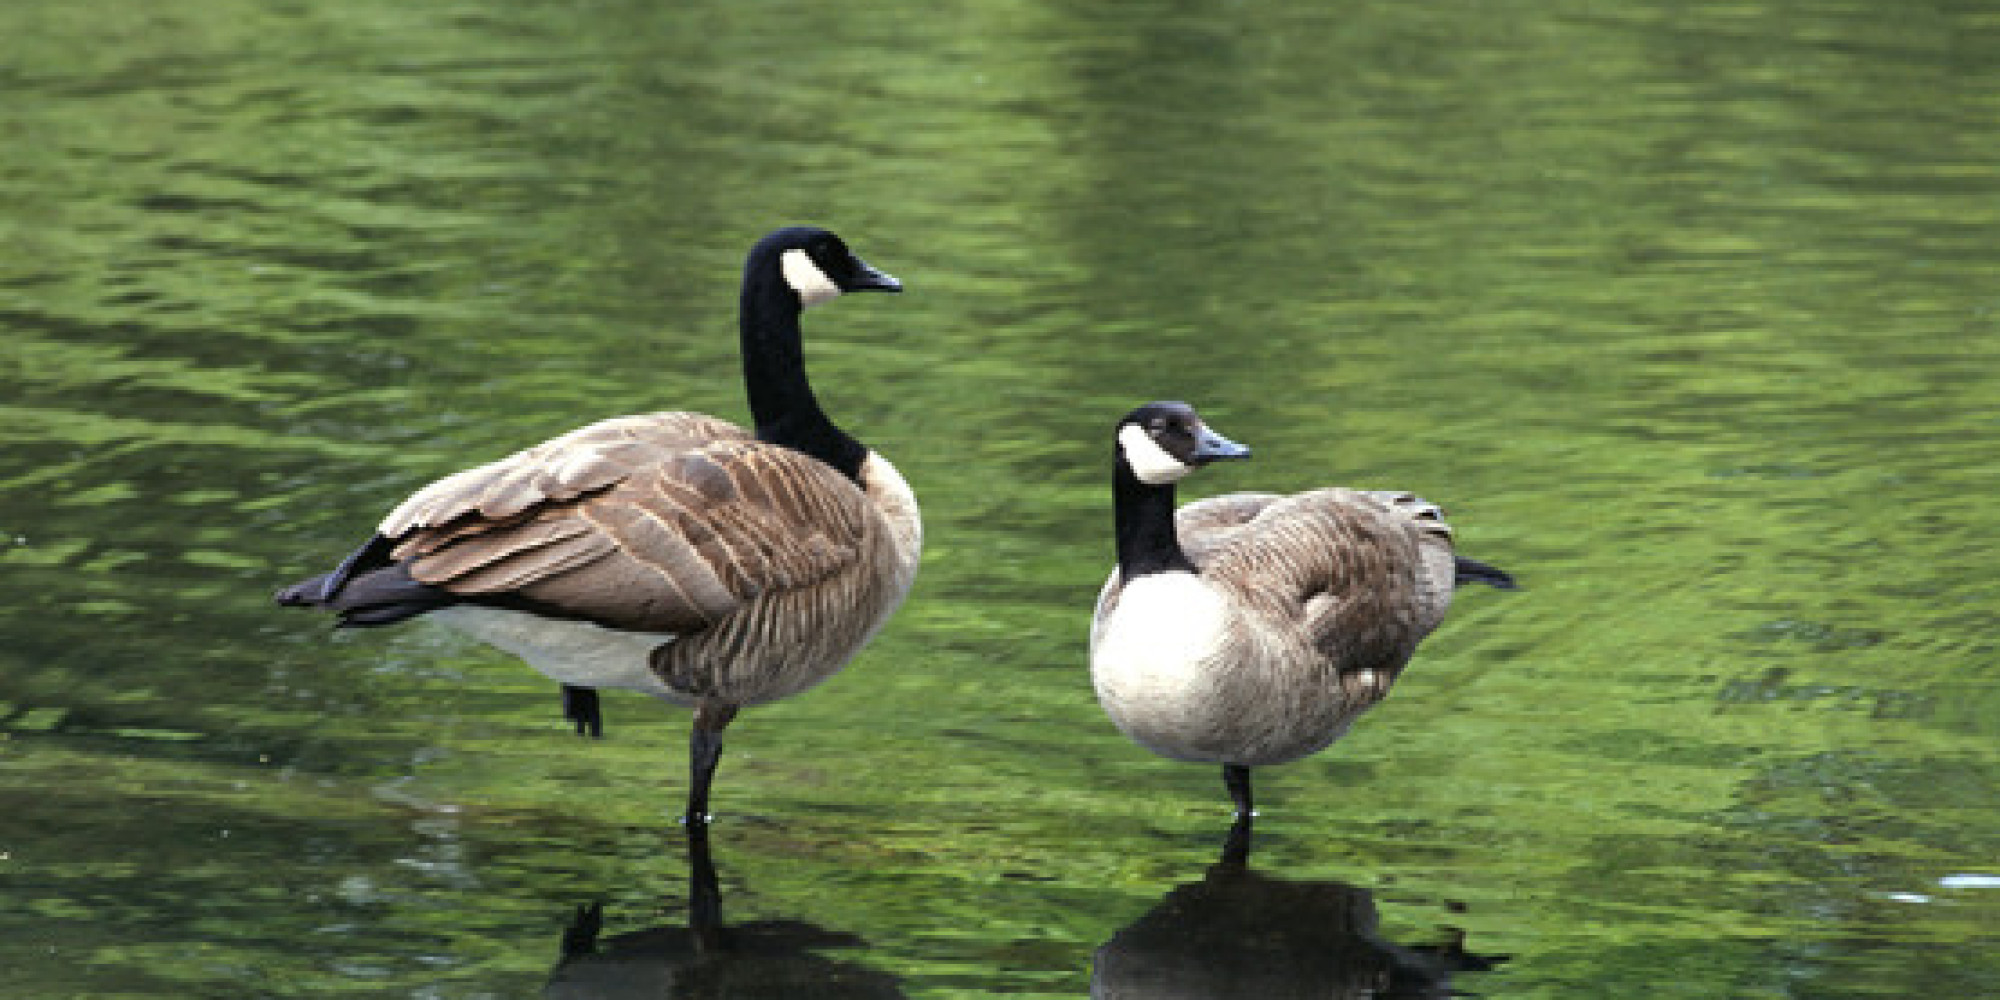 Canada Goose montebello parka replica price - 10 Things You Didn't Know About Canada Geese | Huffington Post